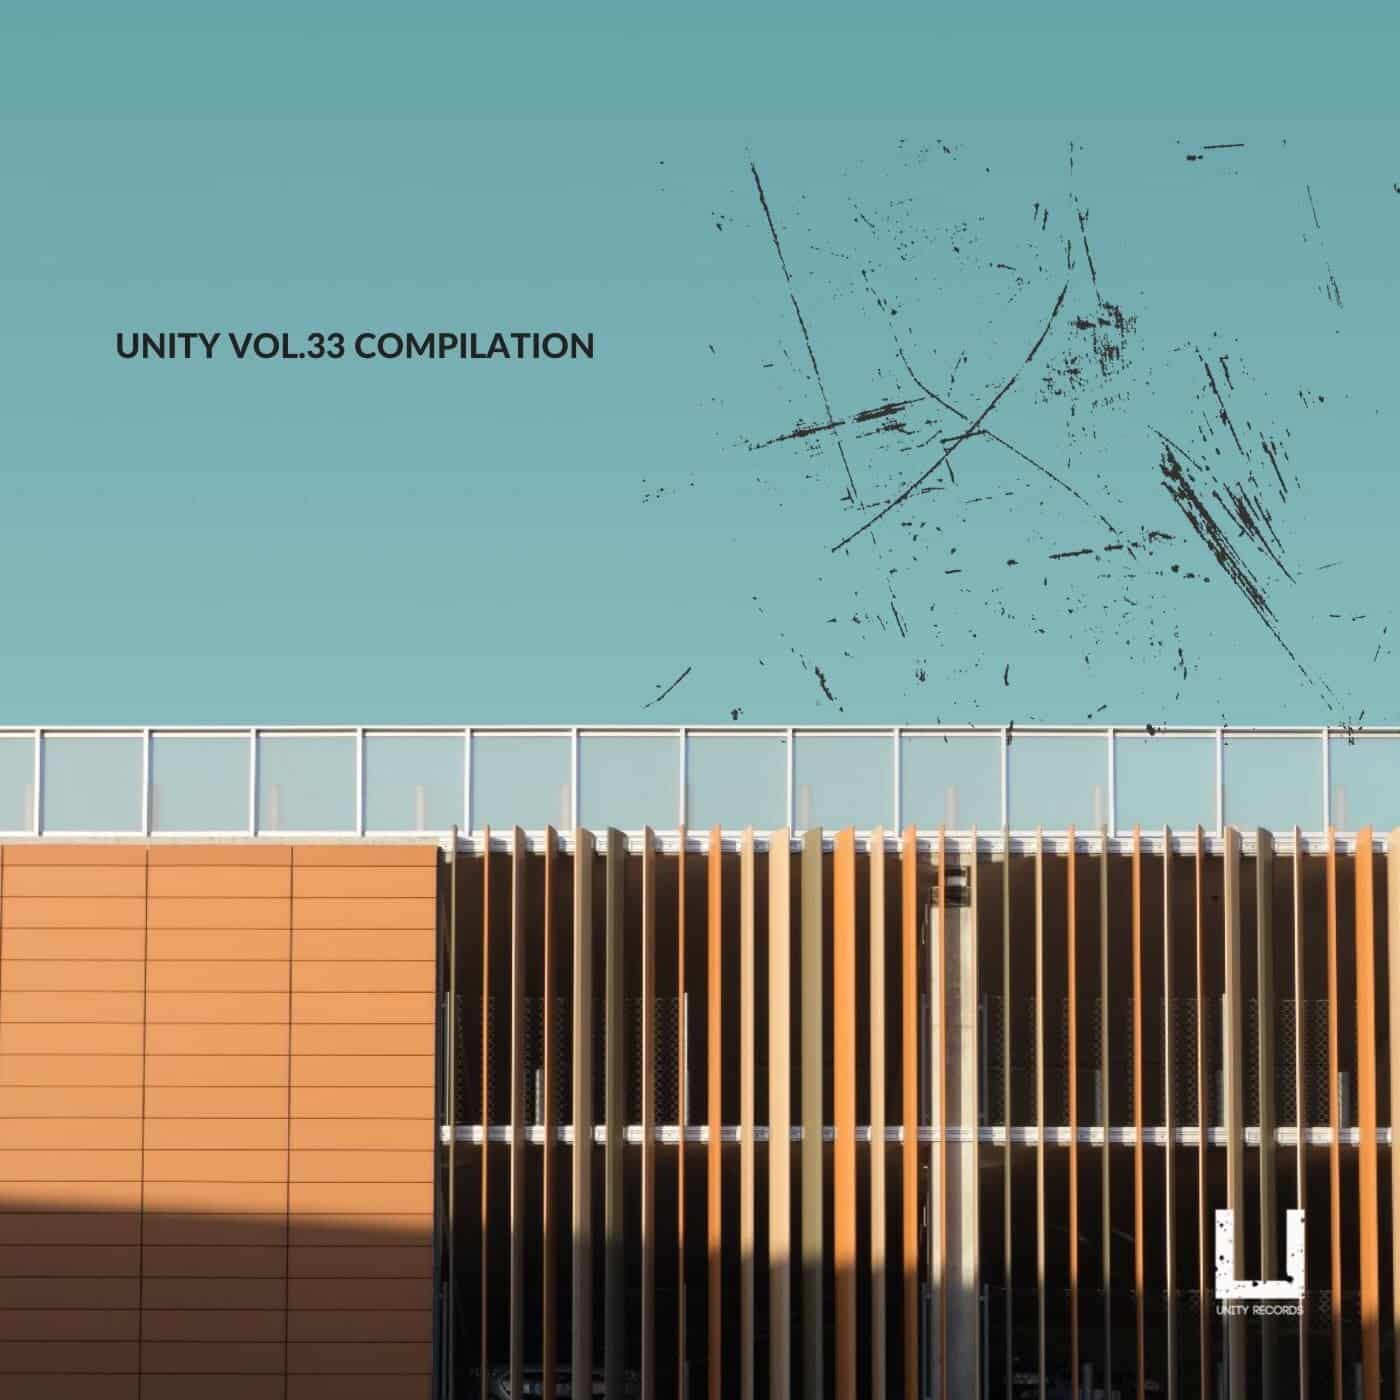 Download Unity, Vol. 33 Compilation on Electrobuzz